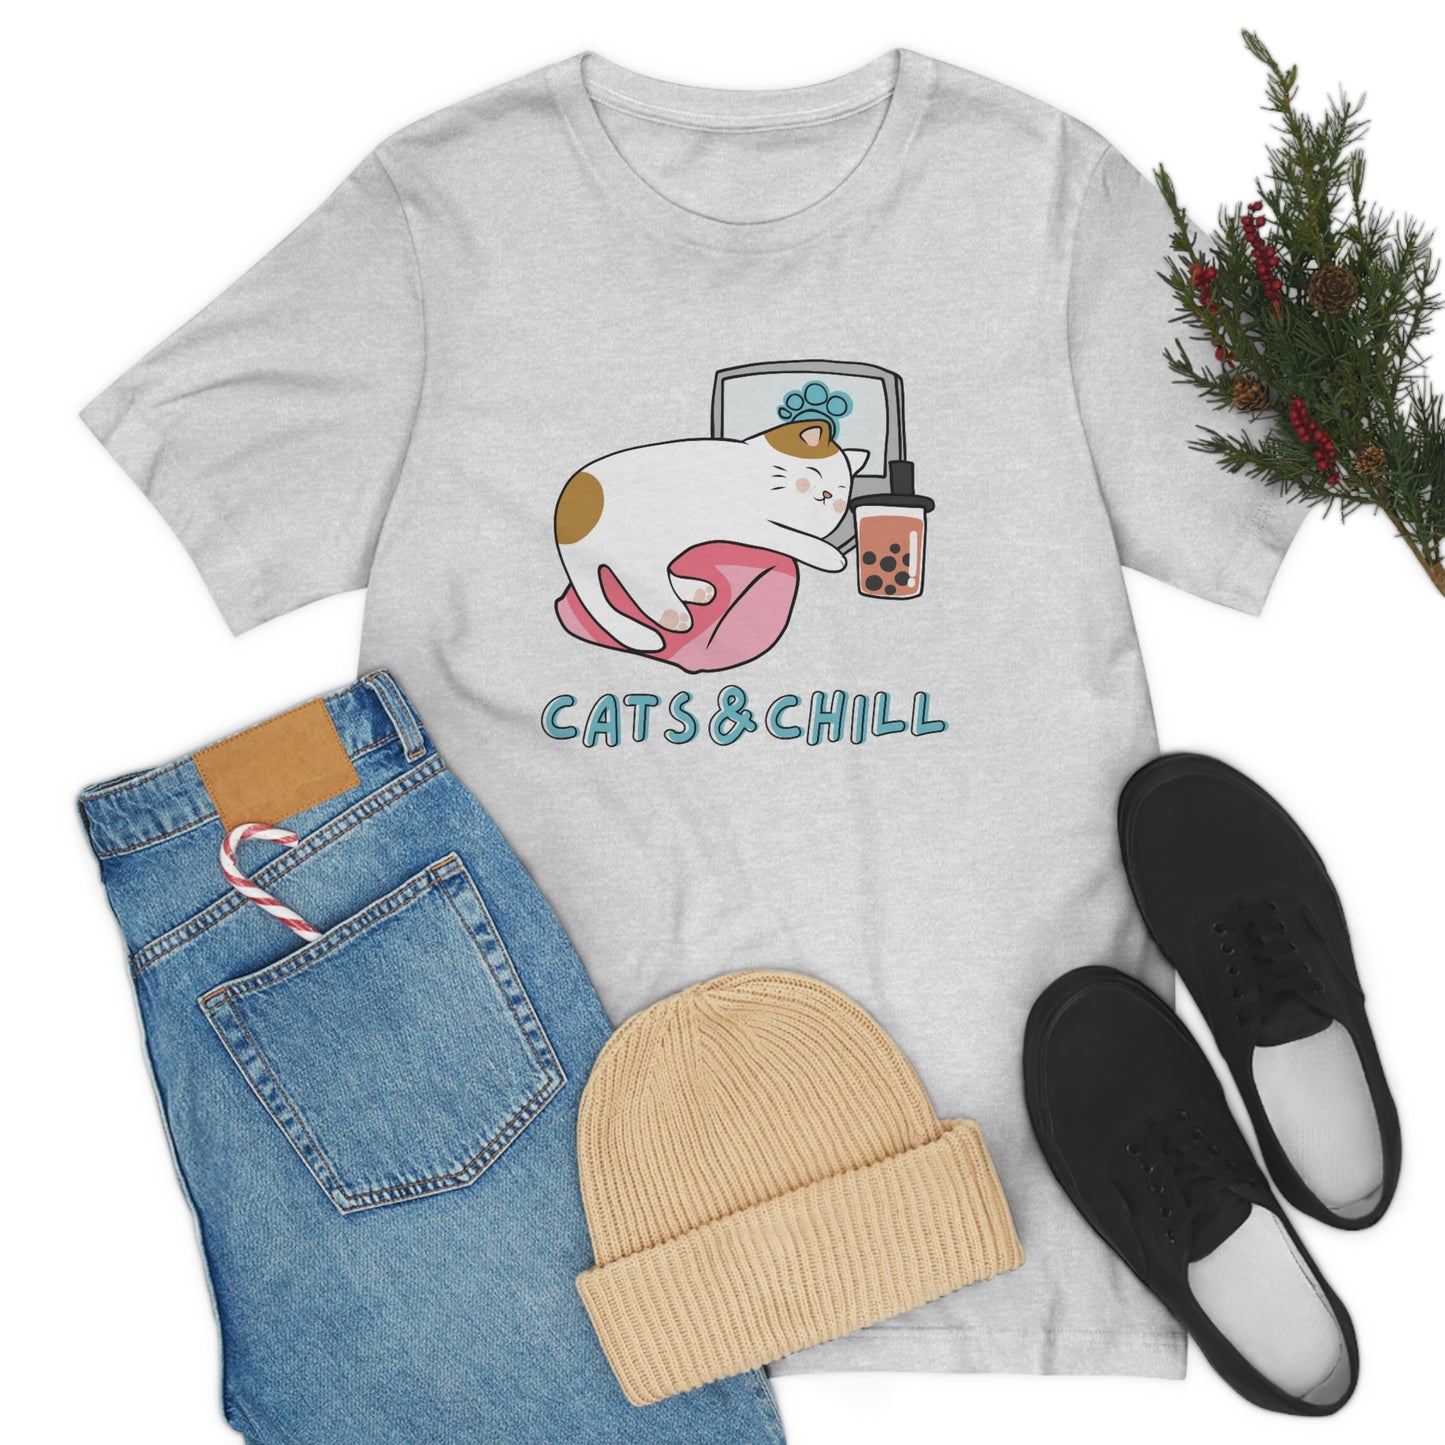 Cats and chill T-shirt